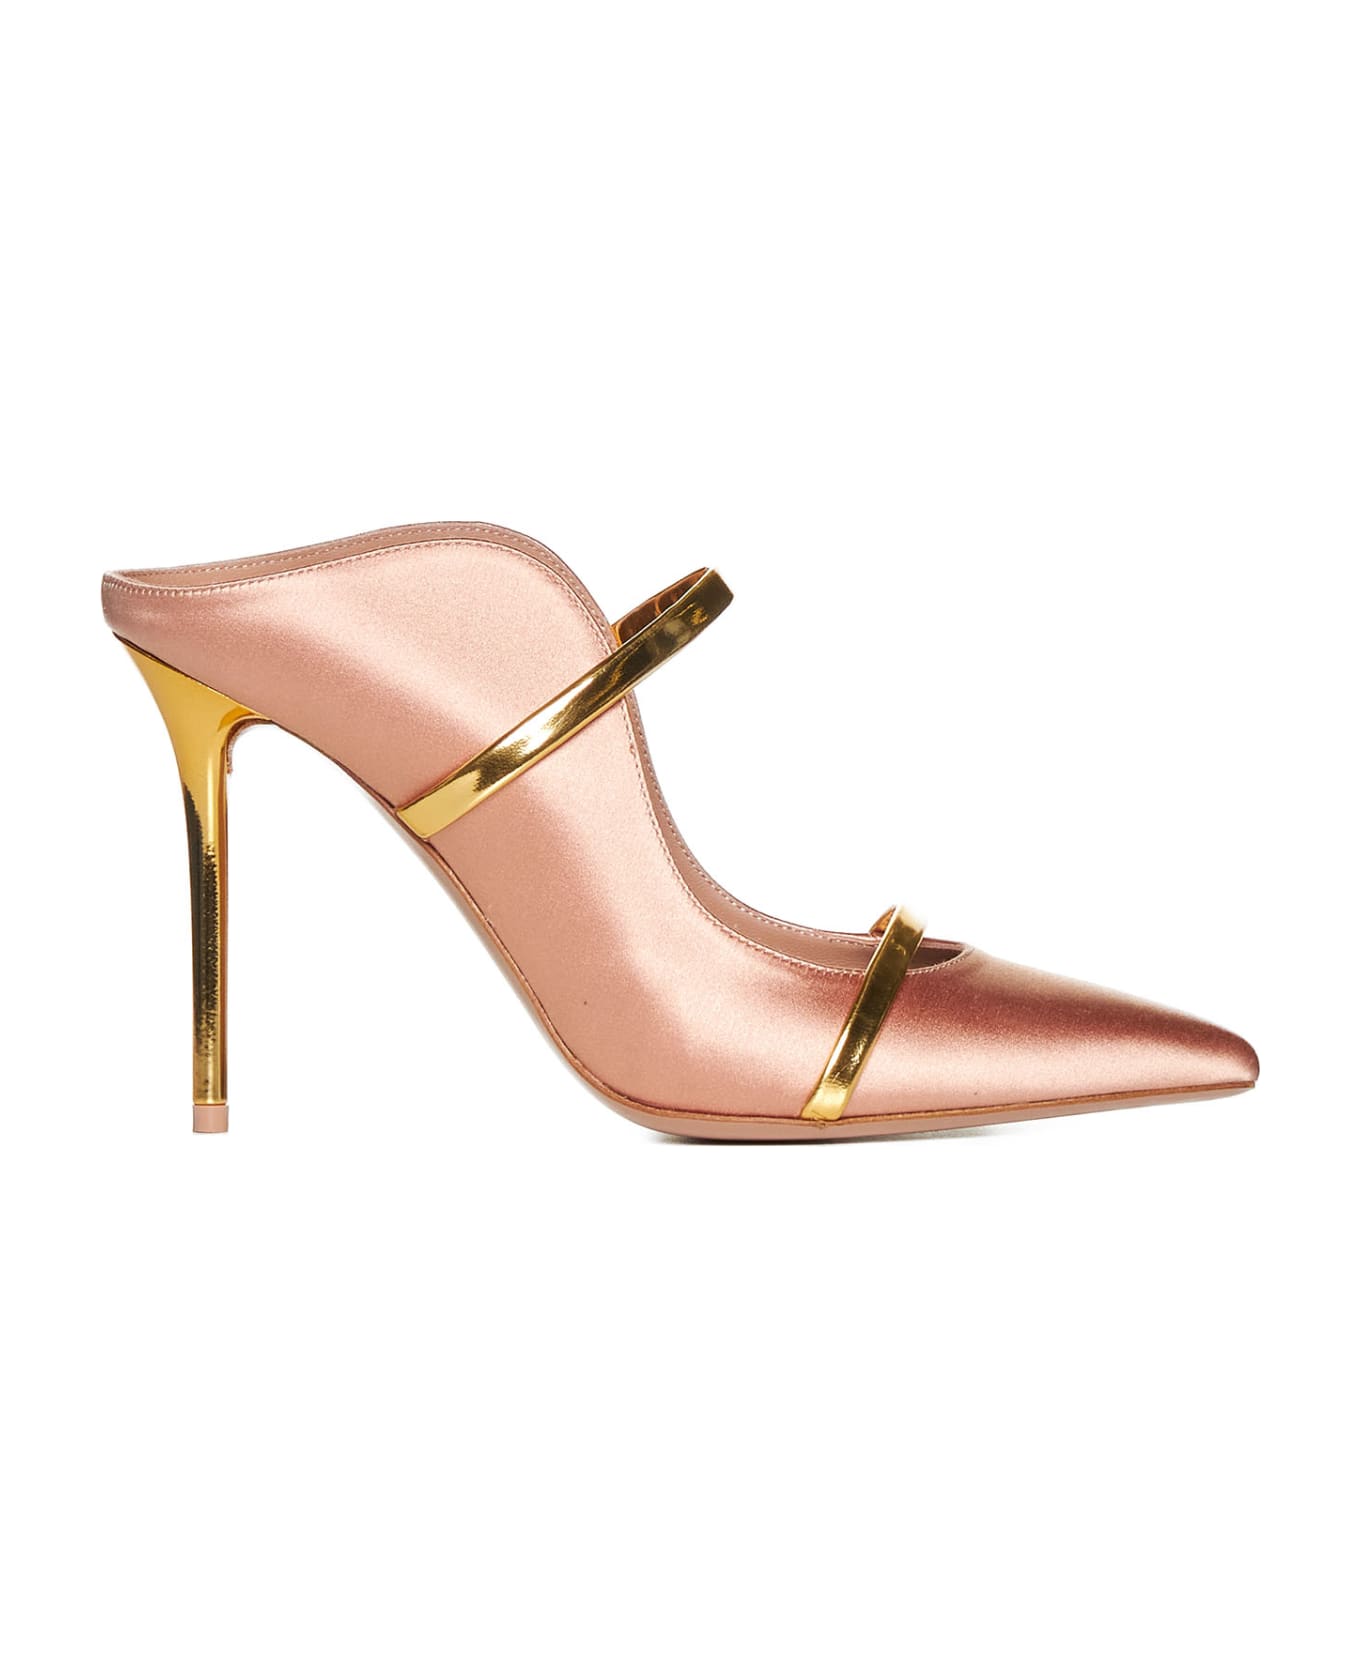 Malone Souliers Sandals - Blush/gold